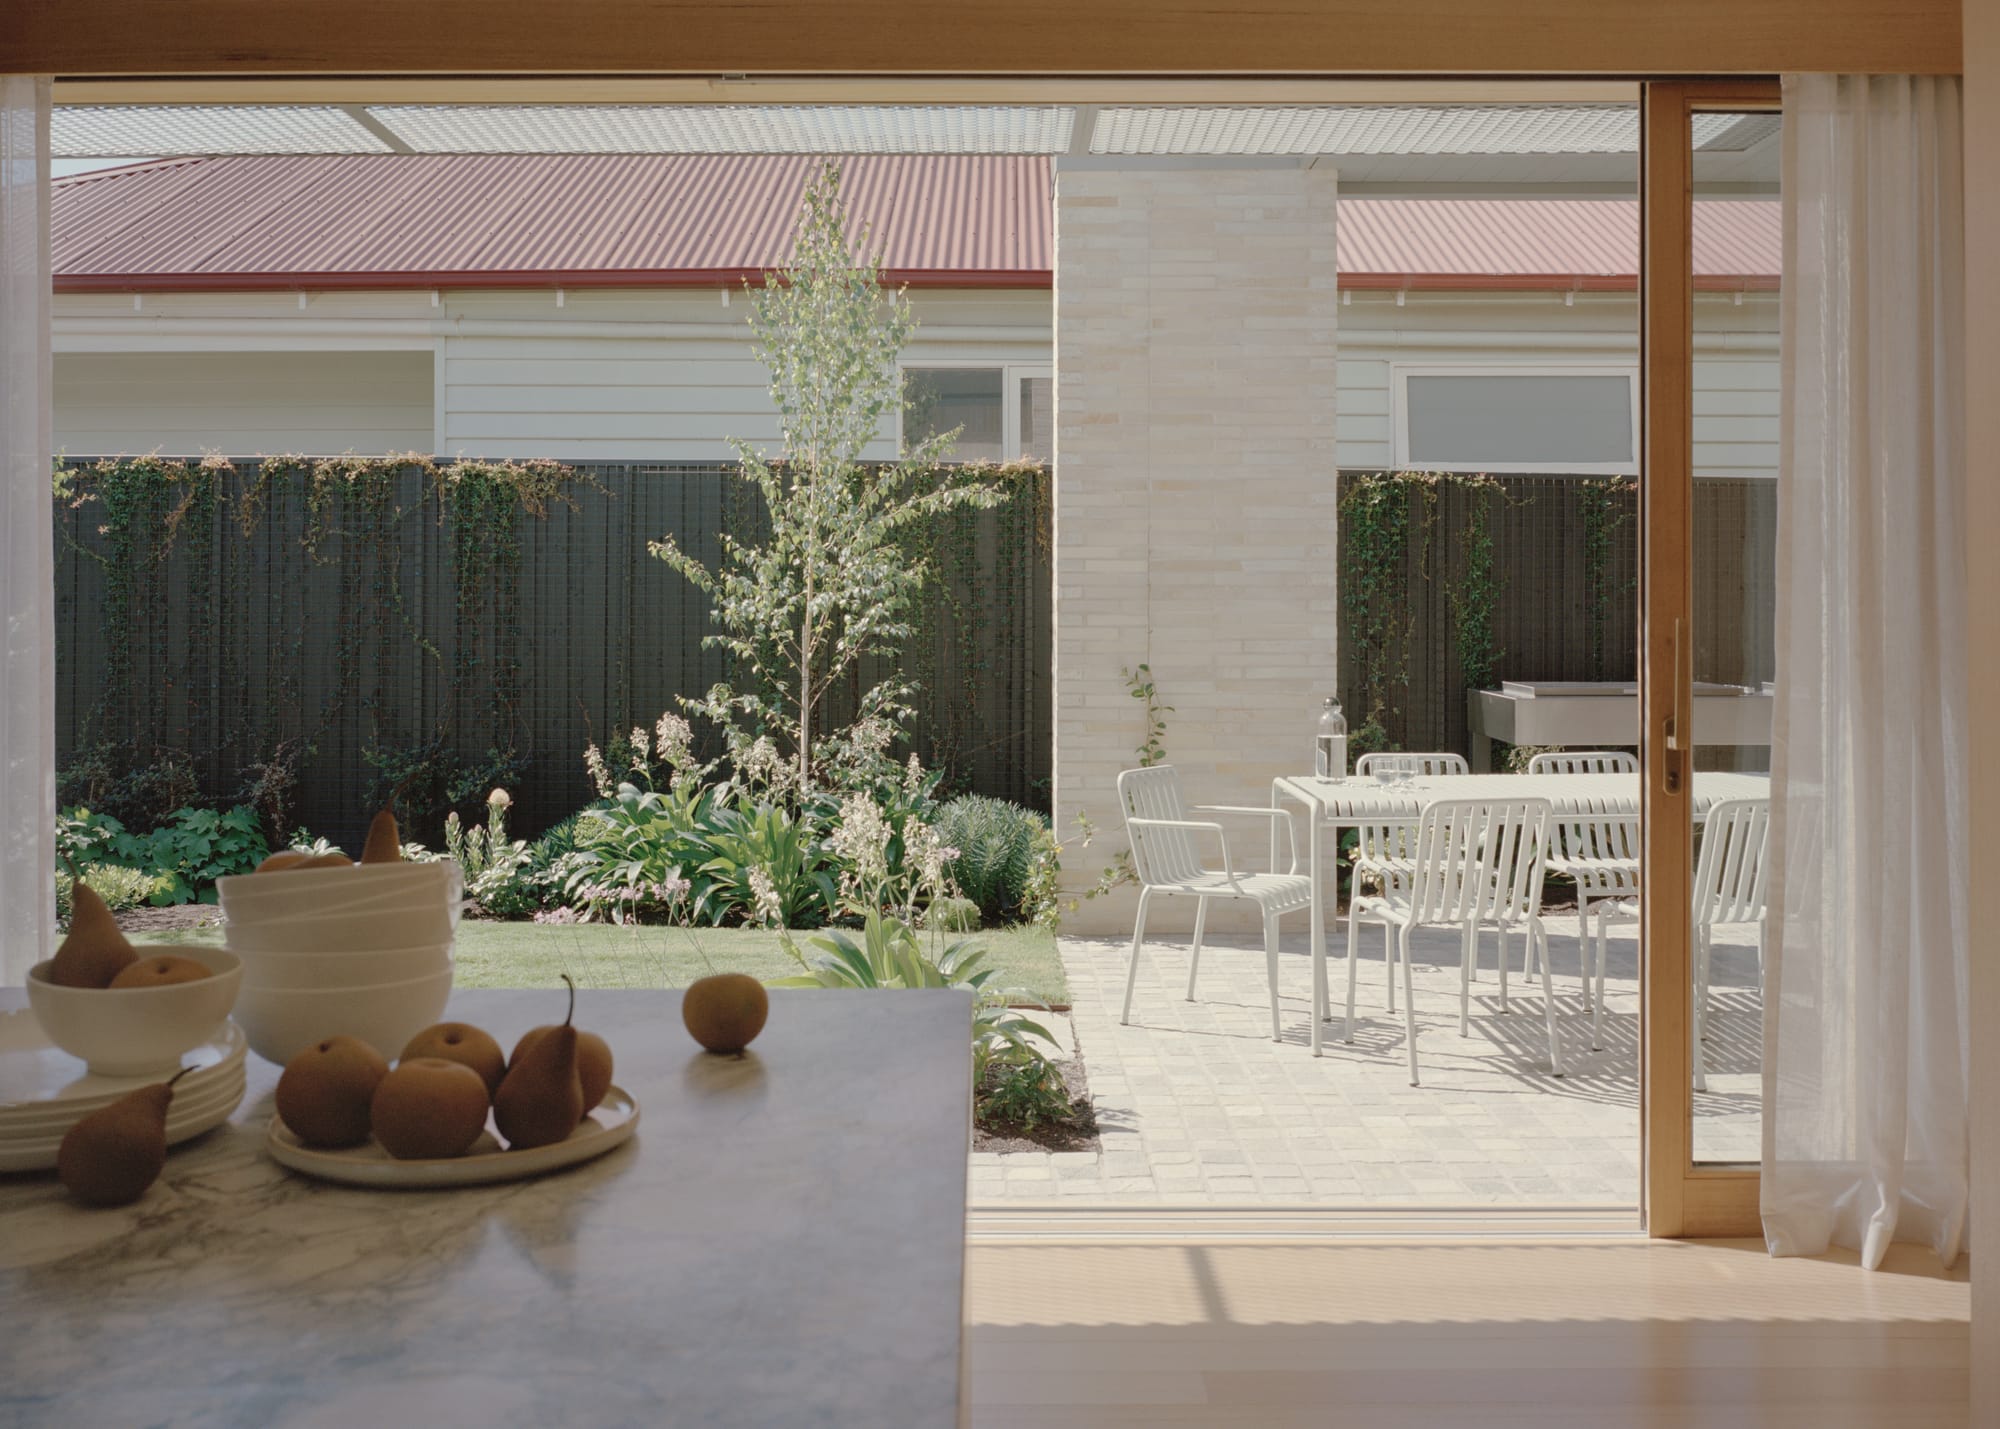 Gable Park by Weaver+Co Architects. Photography by Tasha Tylee. View to patio and courtyard through sliding timber framed doors in kitchen. White outdoor dining setting and green grass.